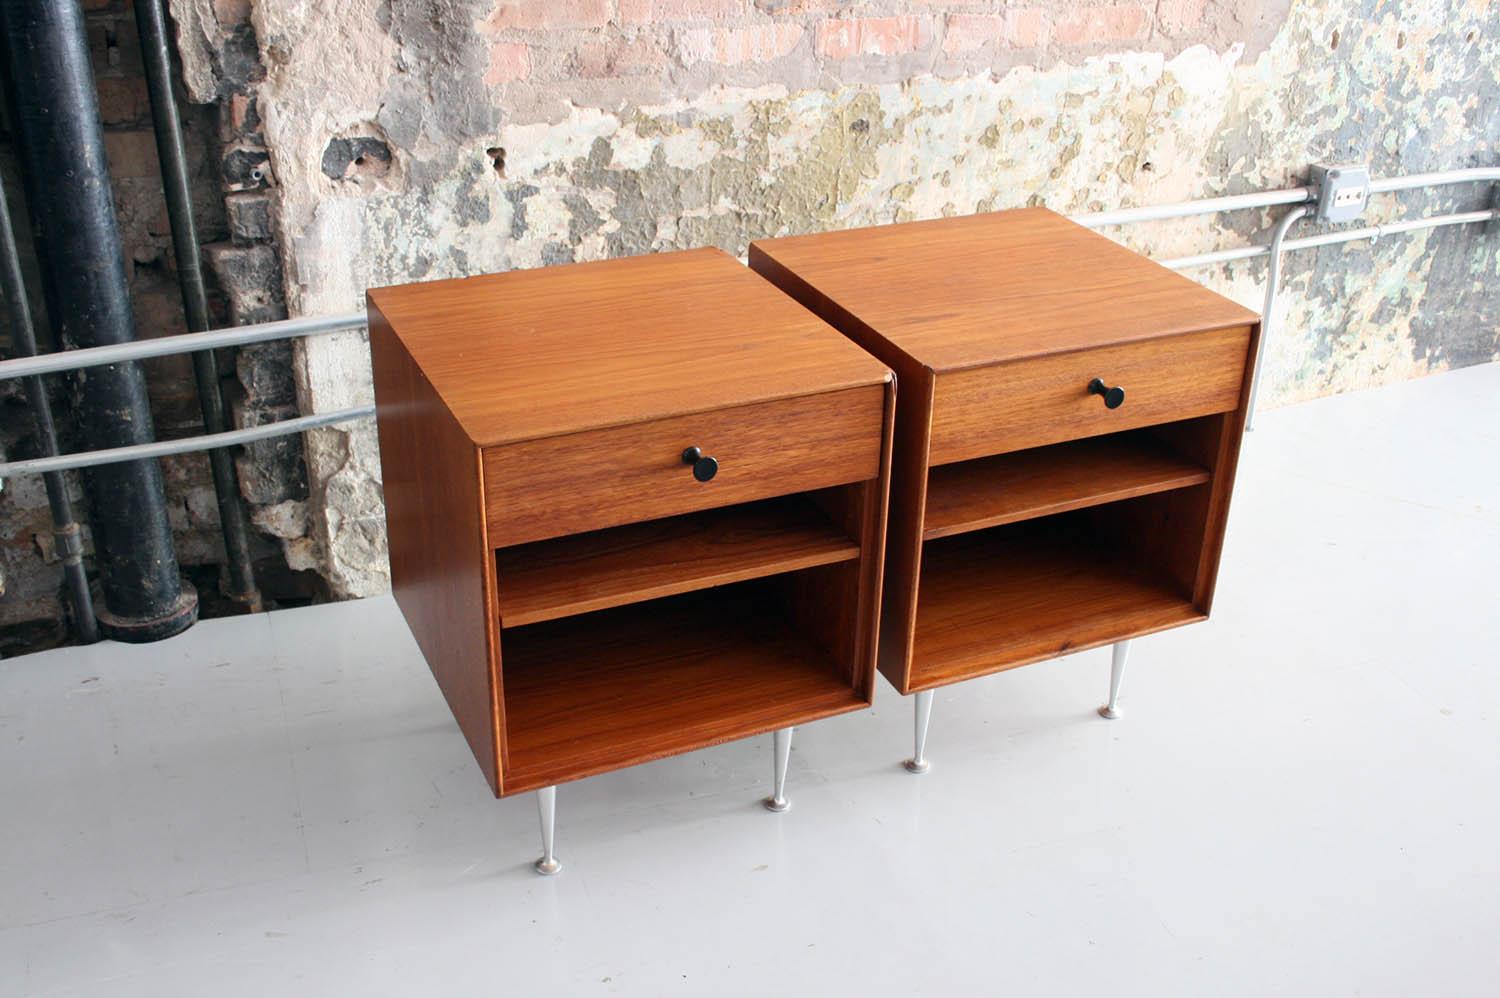 Matched pair!

A fantastic pair of teak nightstands / bedside tables / end tables designed by George Nelson for Herman Miller circa 1950s Zeeland, Michigan. These Thin Edge collection cases are crafted in teak with all original porcelain pulls and